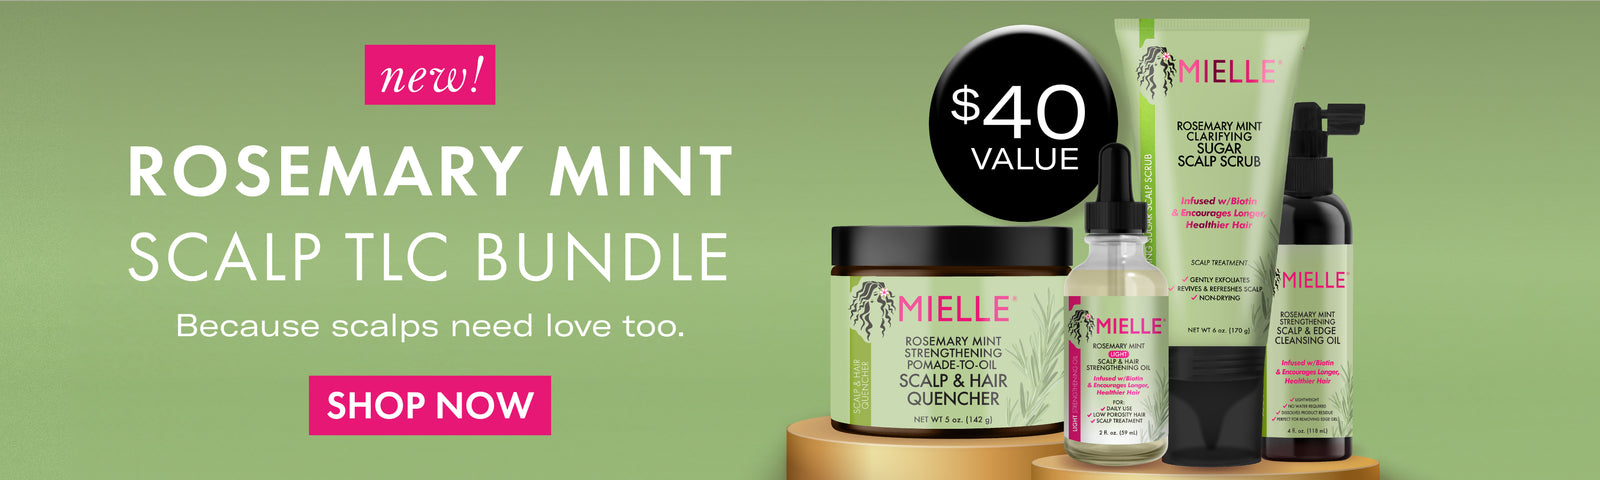 Banner image on the website of rosemary mint scalp TLC hair bundle with $40 value